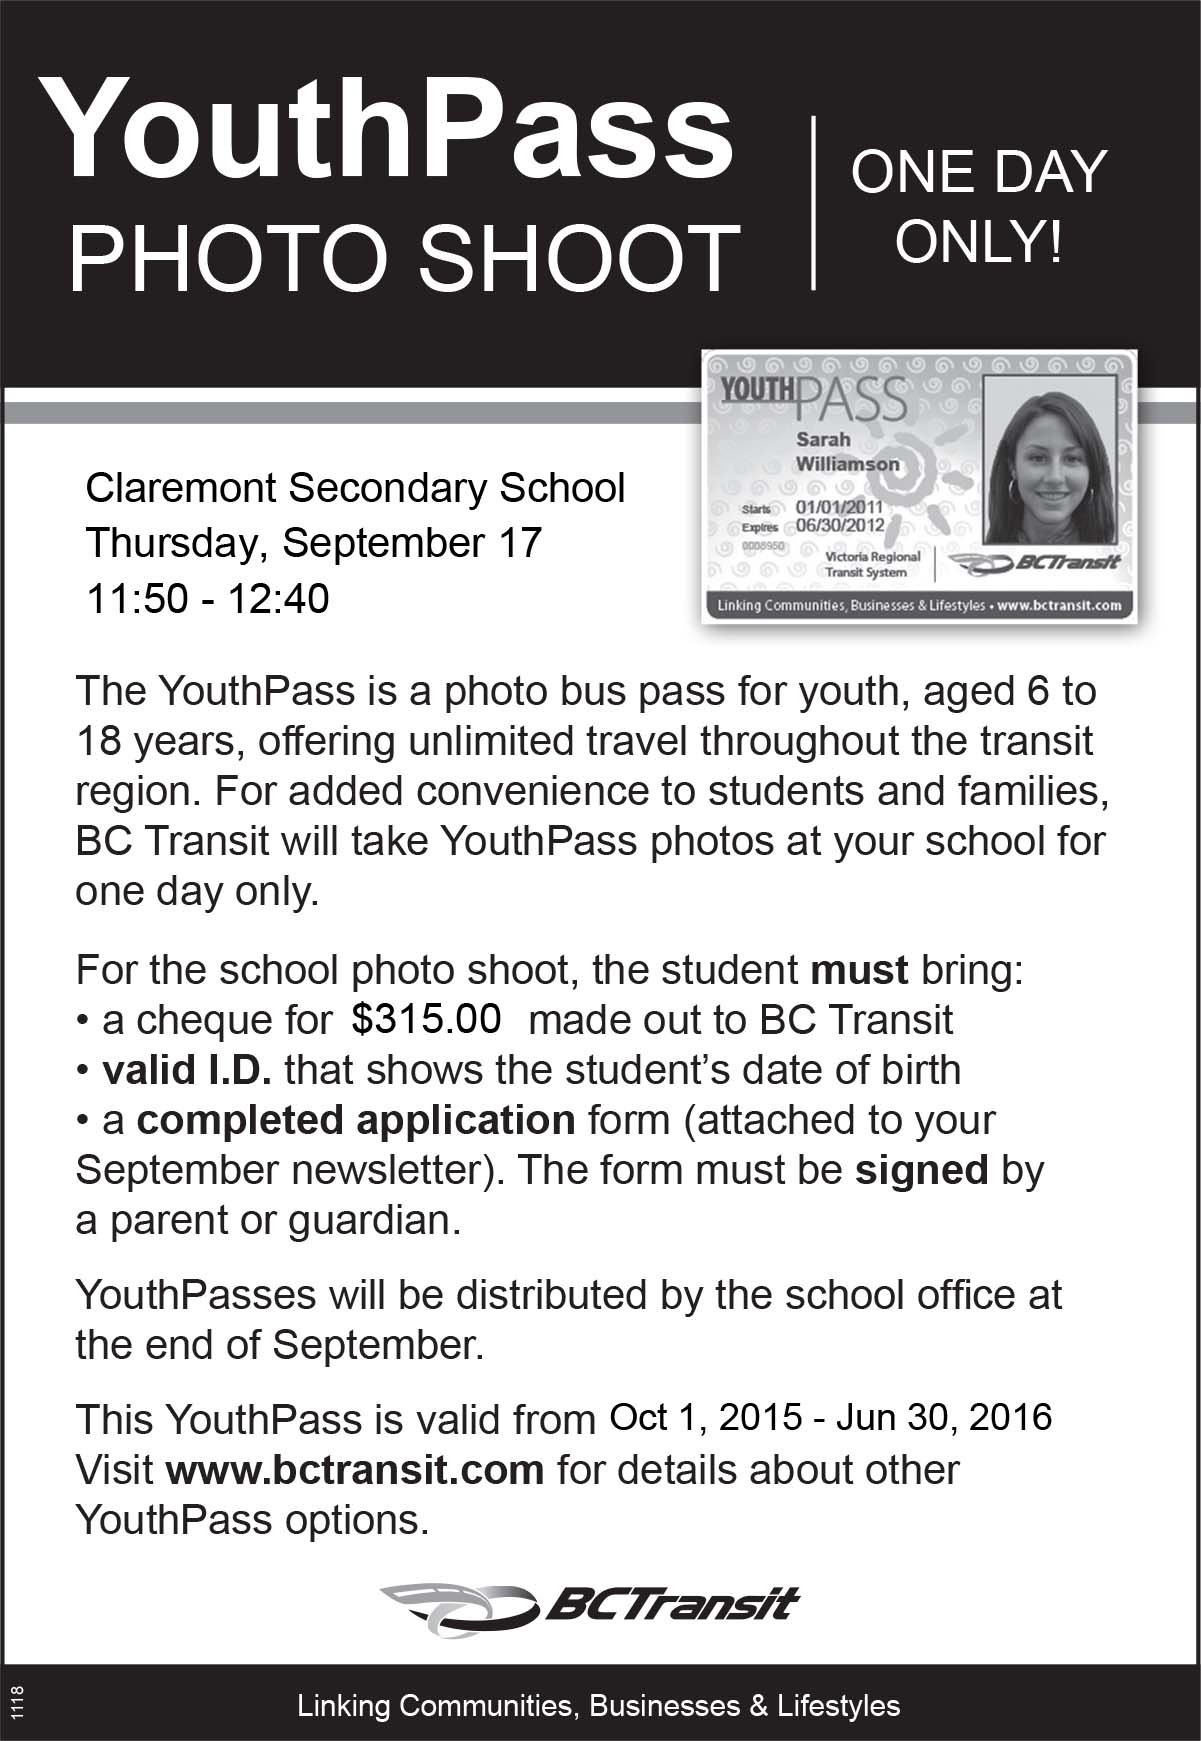 Youth Pass Details